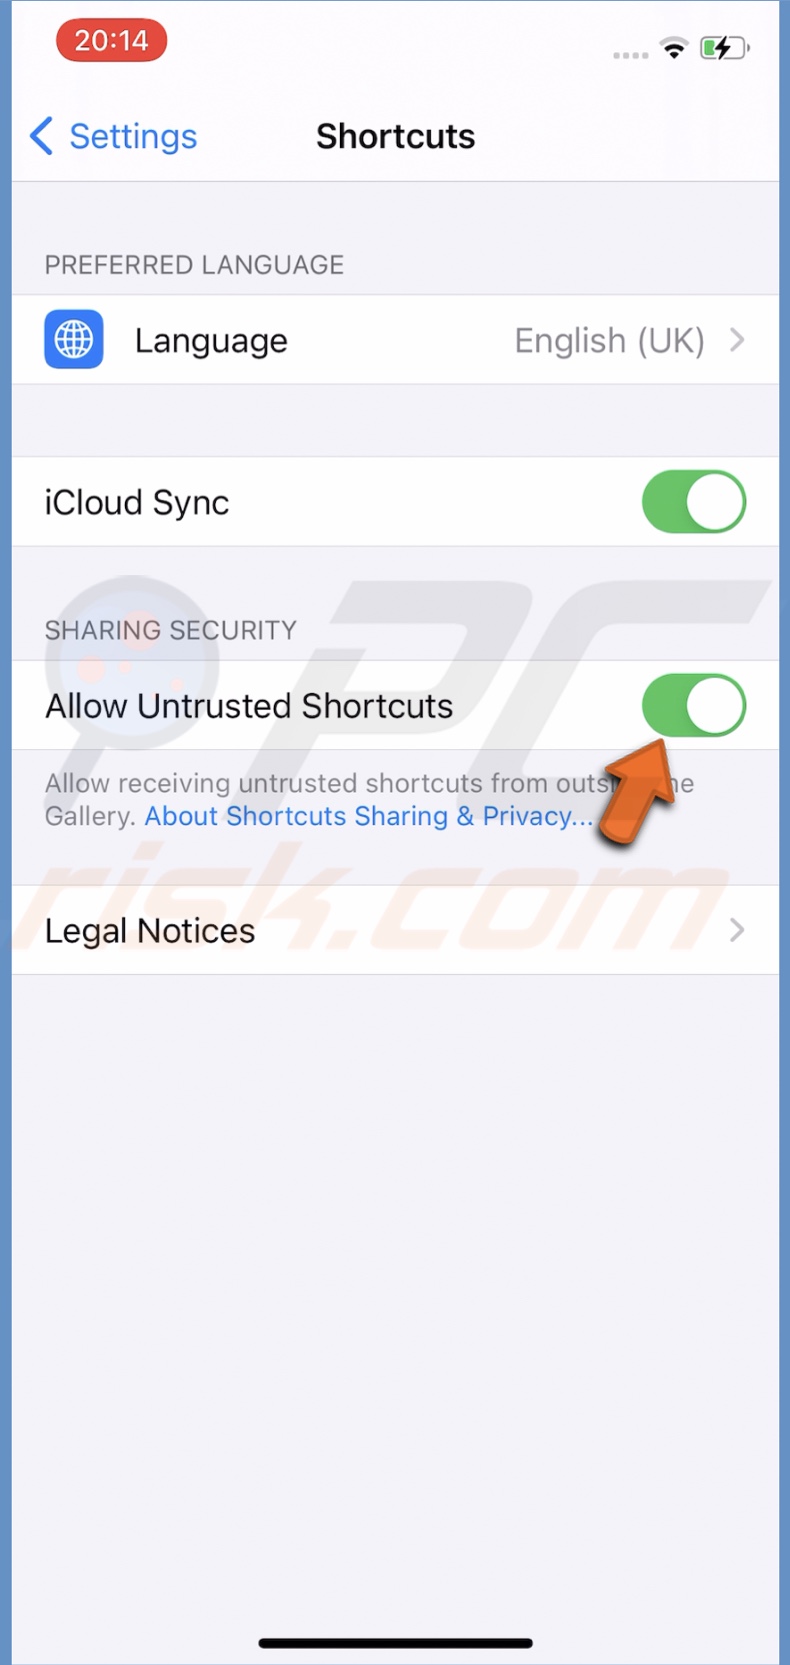 Enable Allow untrusted shortcuts